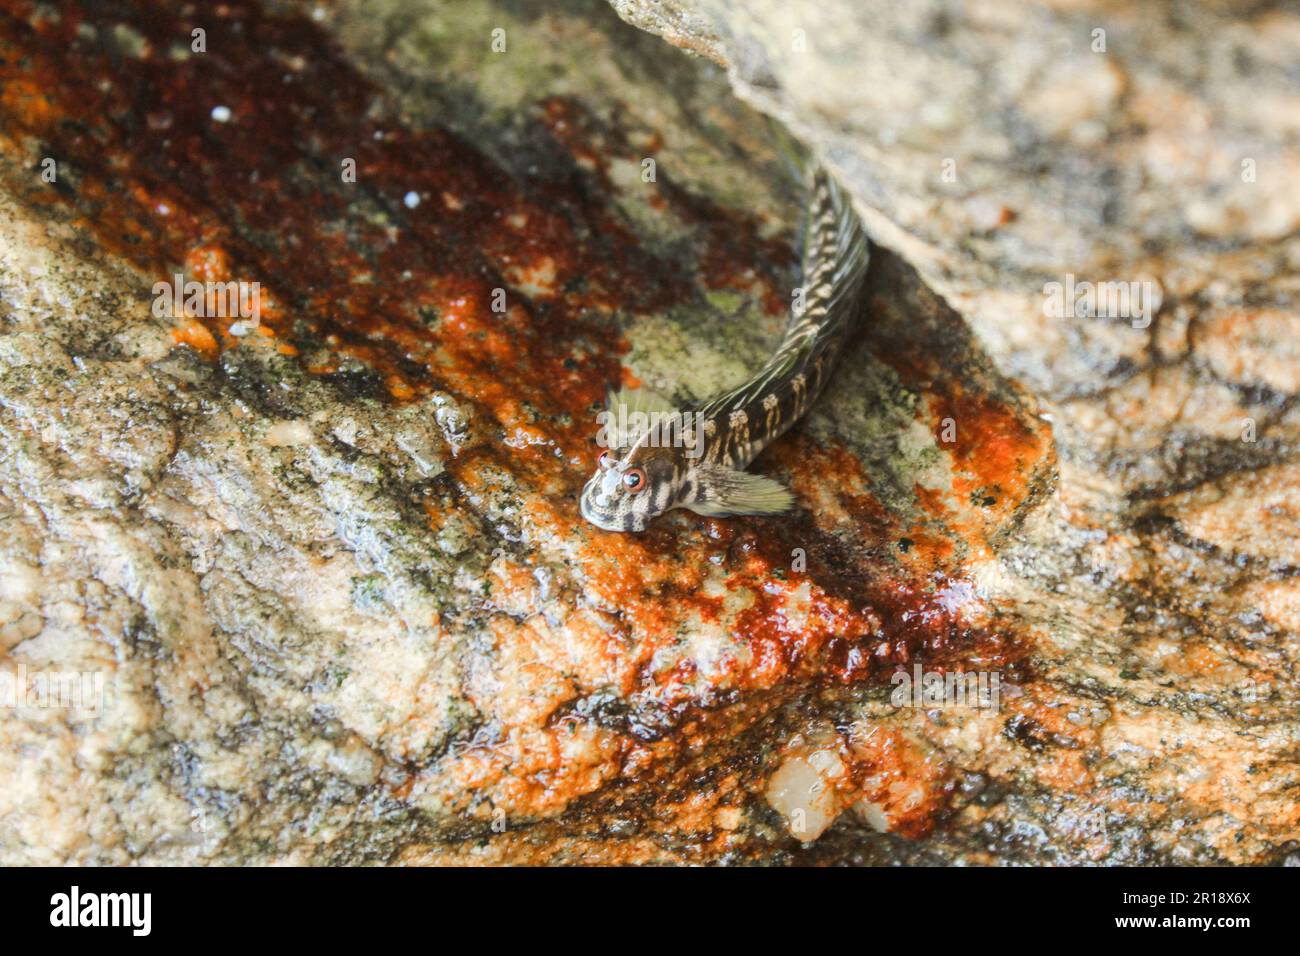 Leaping blenny (Alticus saliens) fish resting on a rock Stock Photo